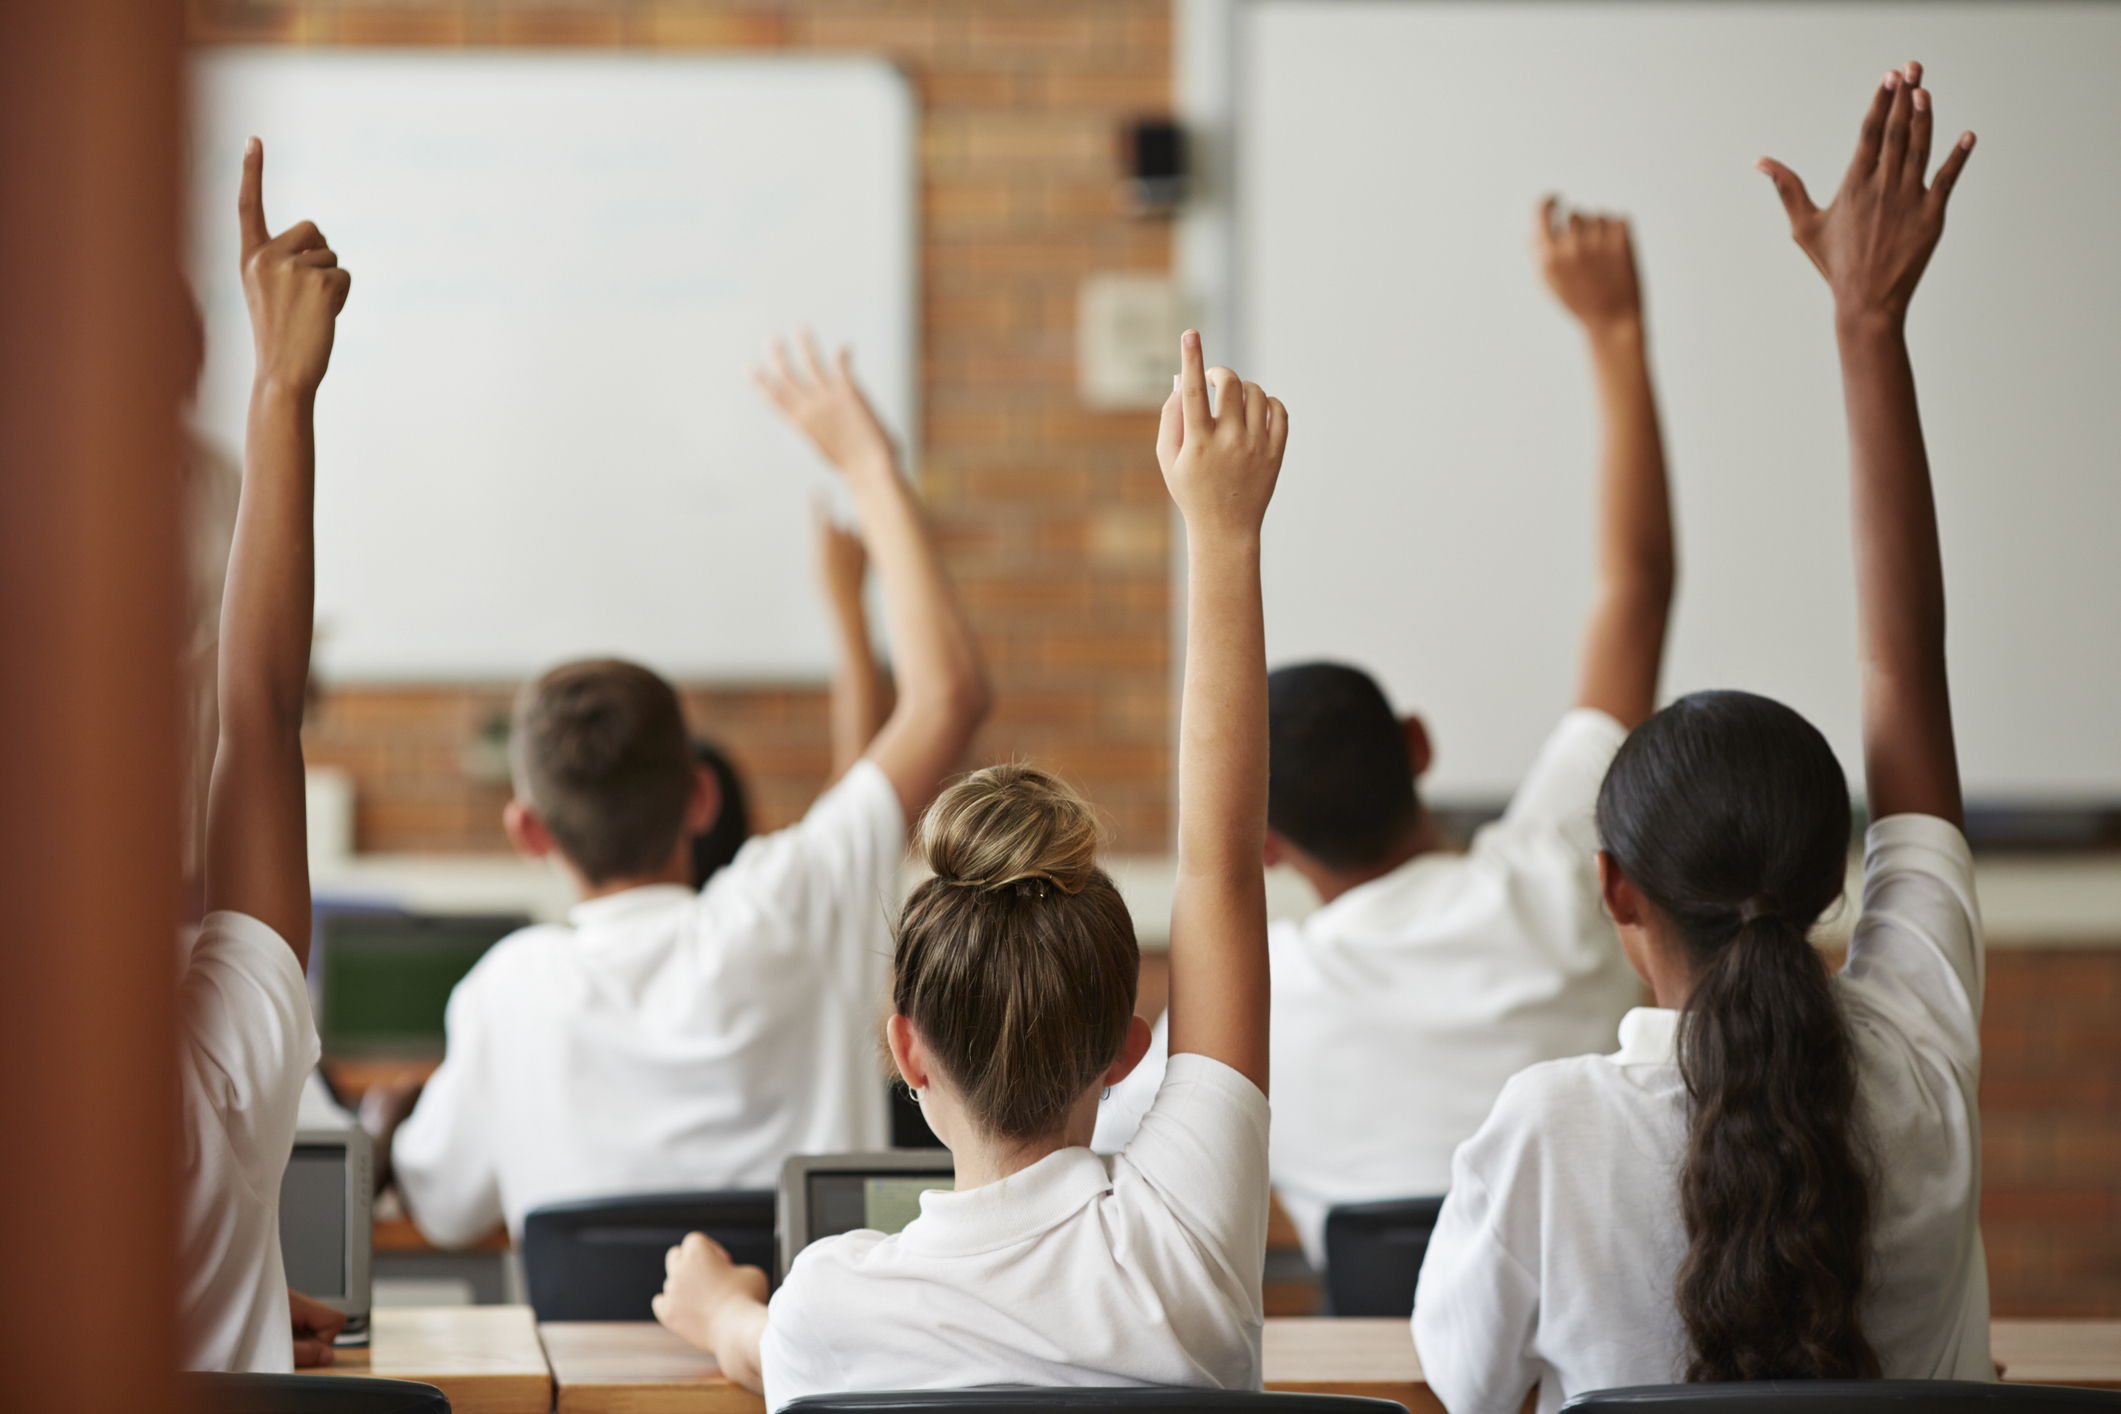 Students raising hands in a classroom, seen from behind